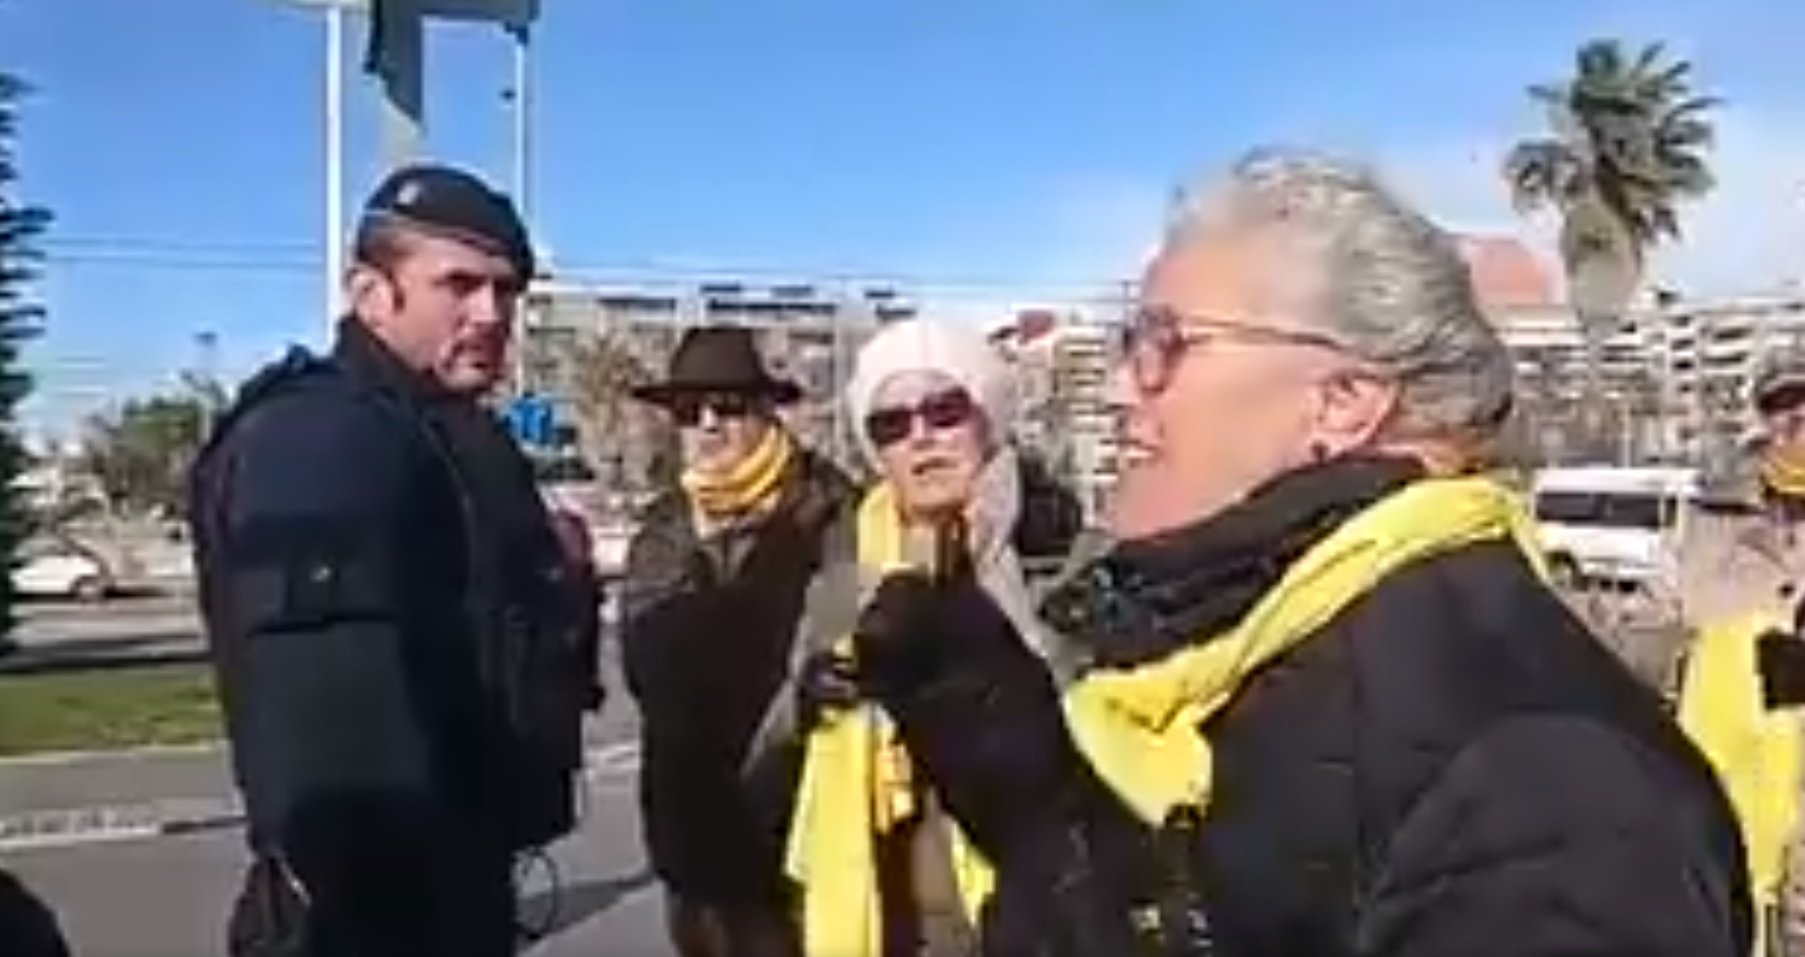 Group stopped because they're wearing yellow scarves and Rajoy to hold an event